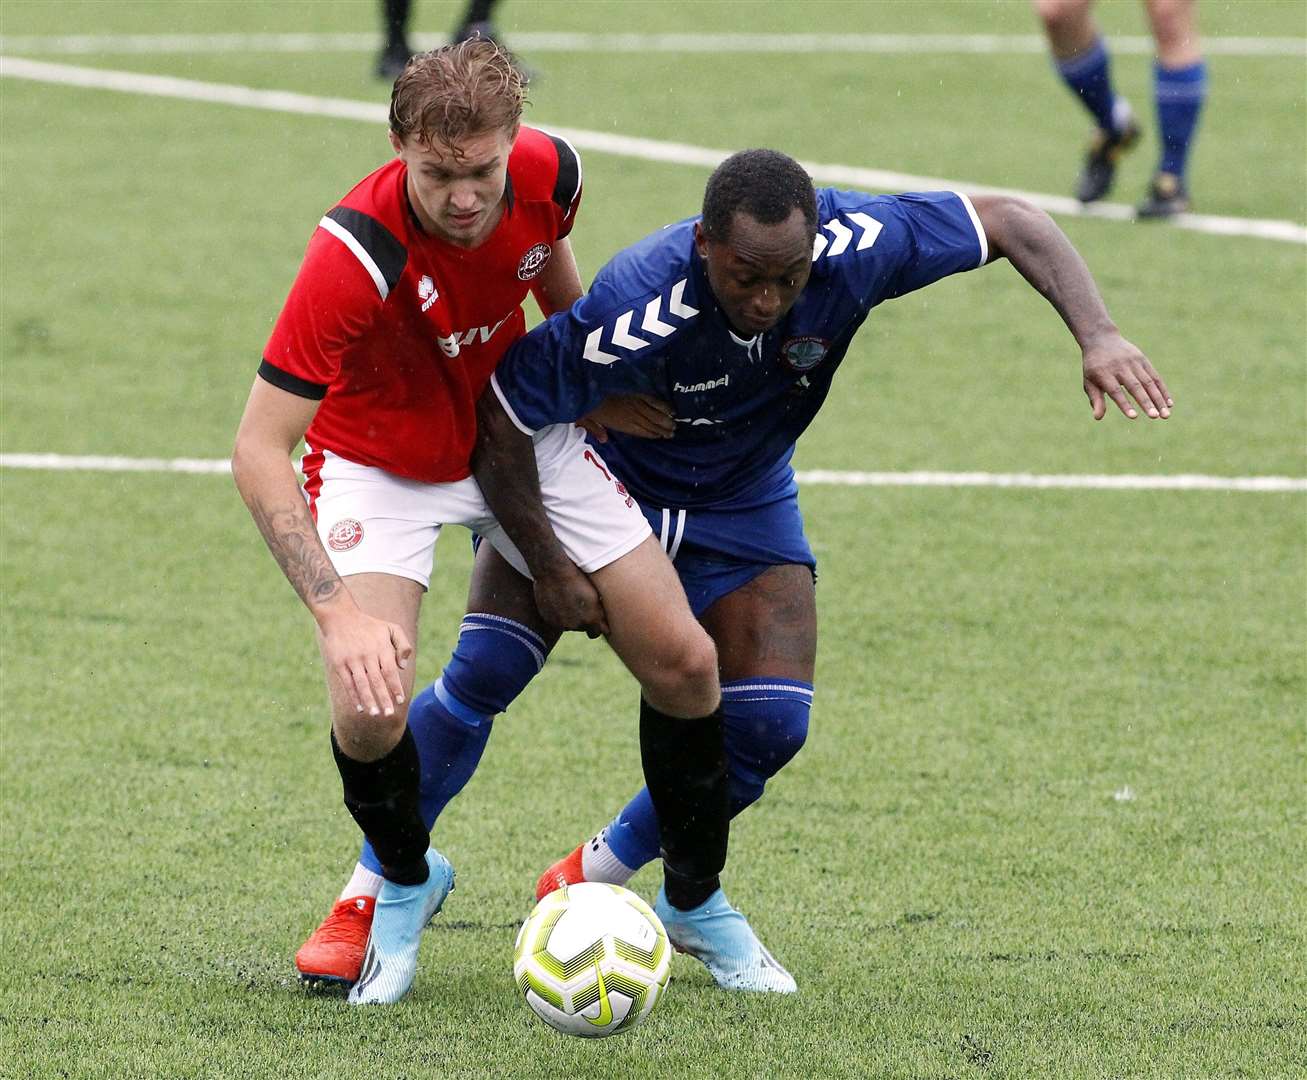 James Jeffrey will be playing for Kennington next season in Division 1 of the SCEFL Picture:Sean Aidan